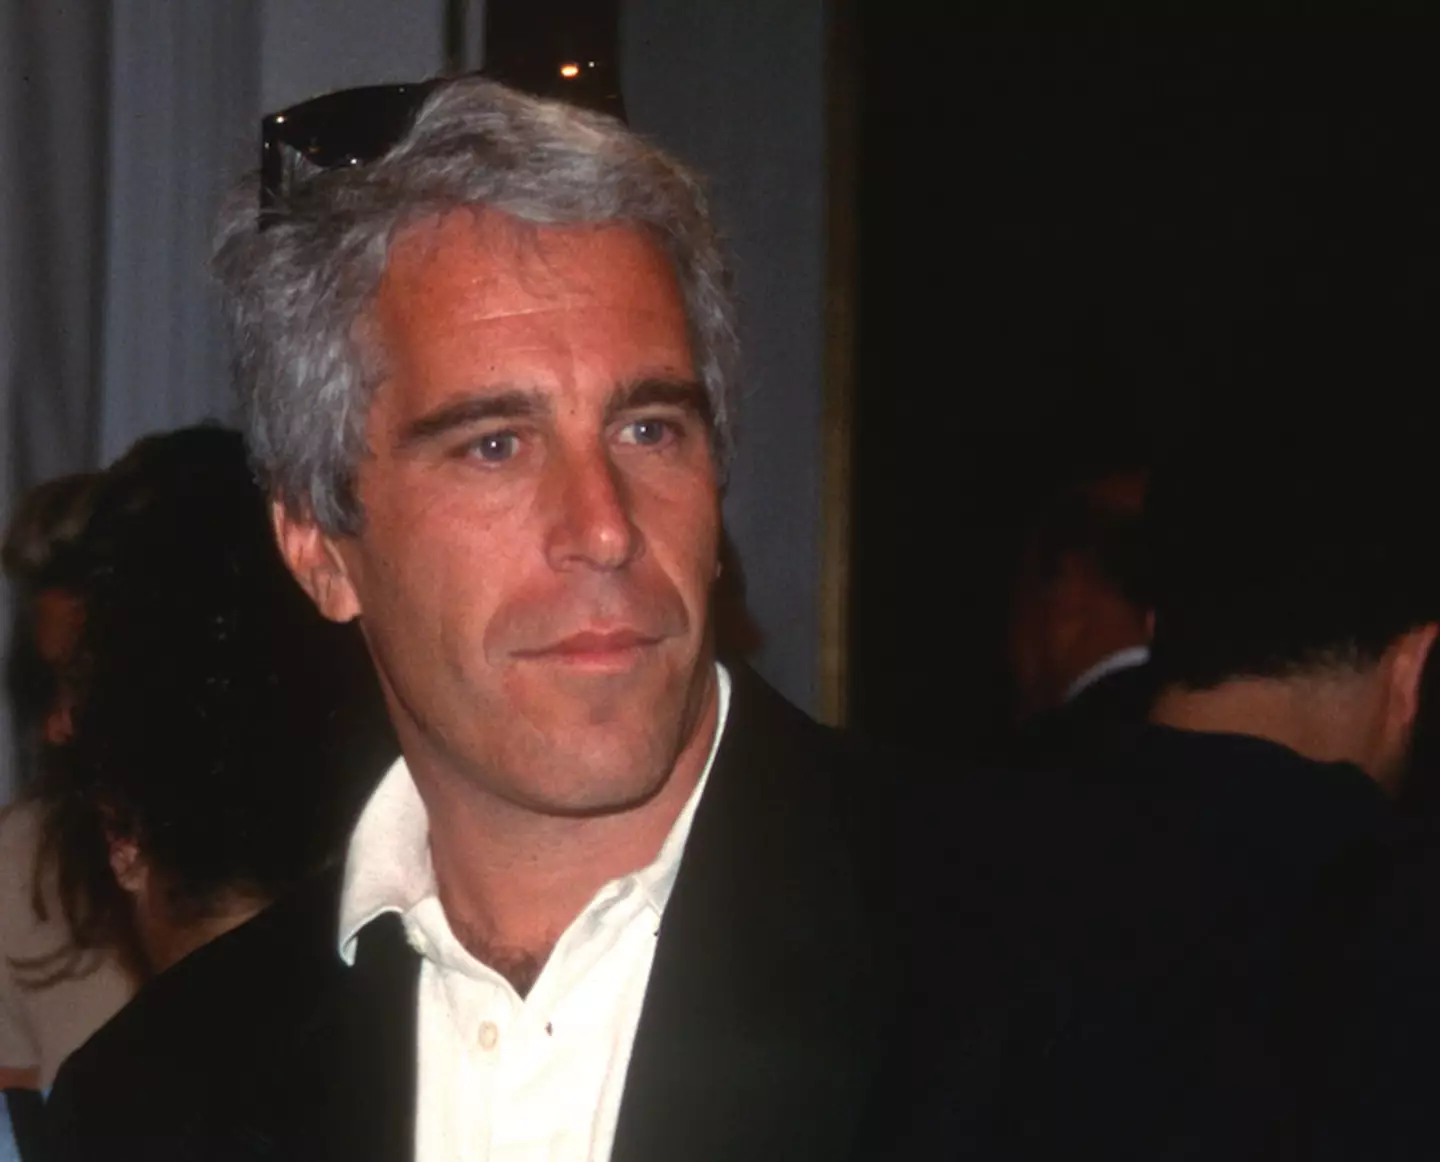 The documents list people associated with Epstein as well as accusers.